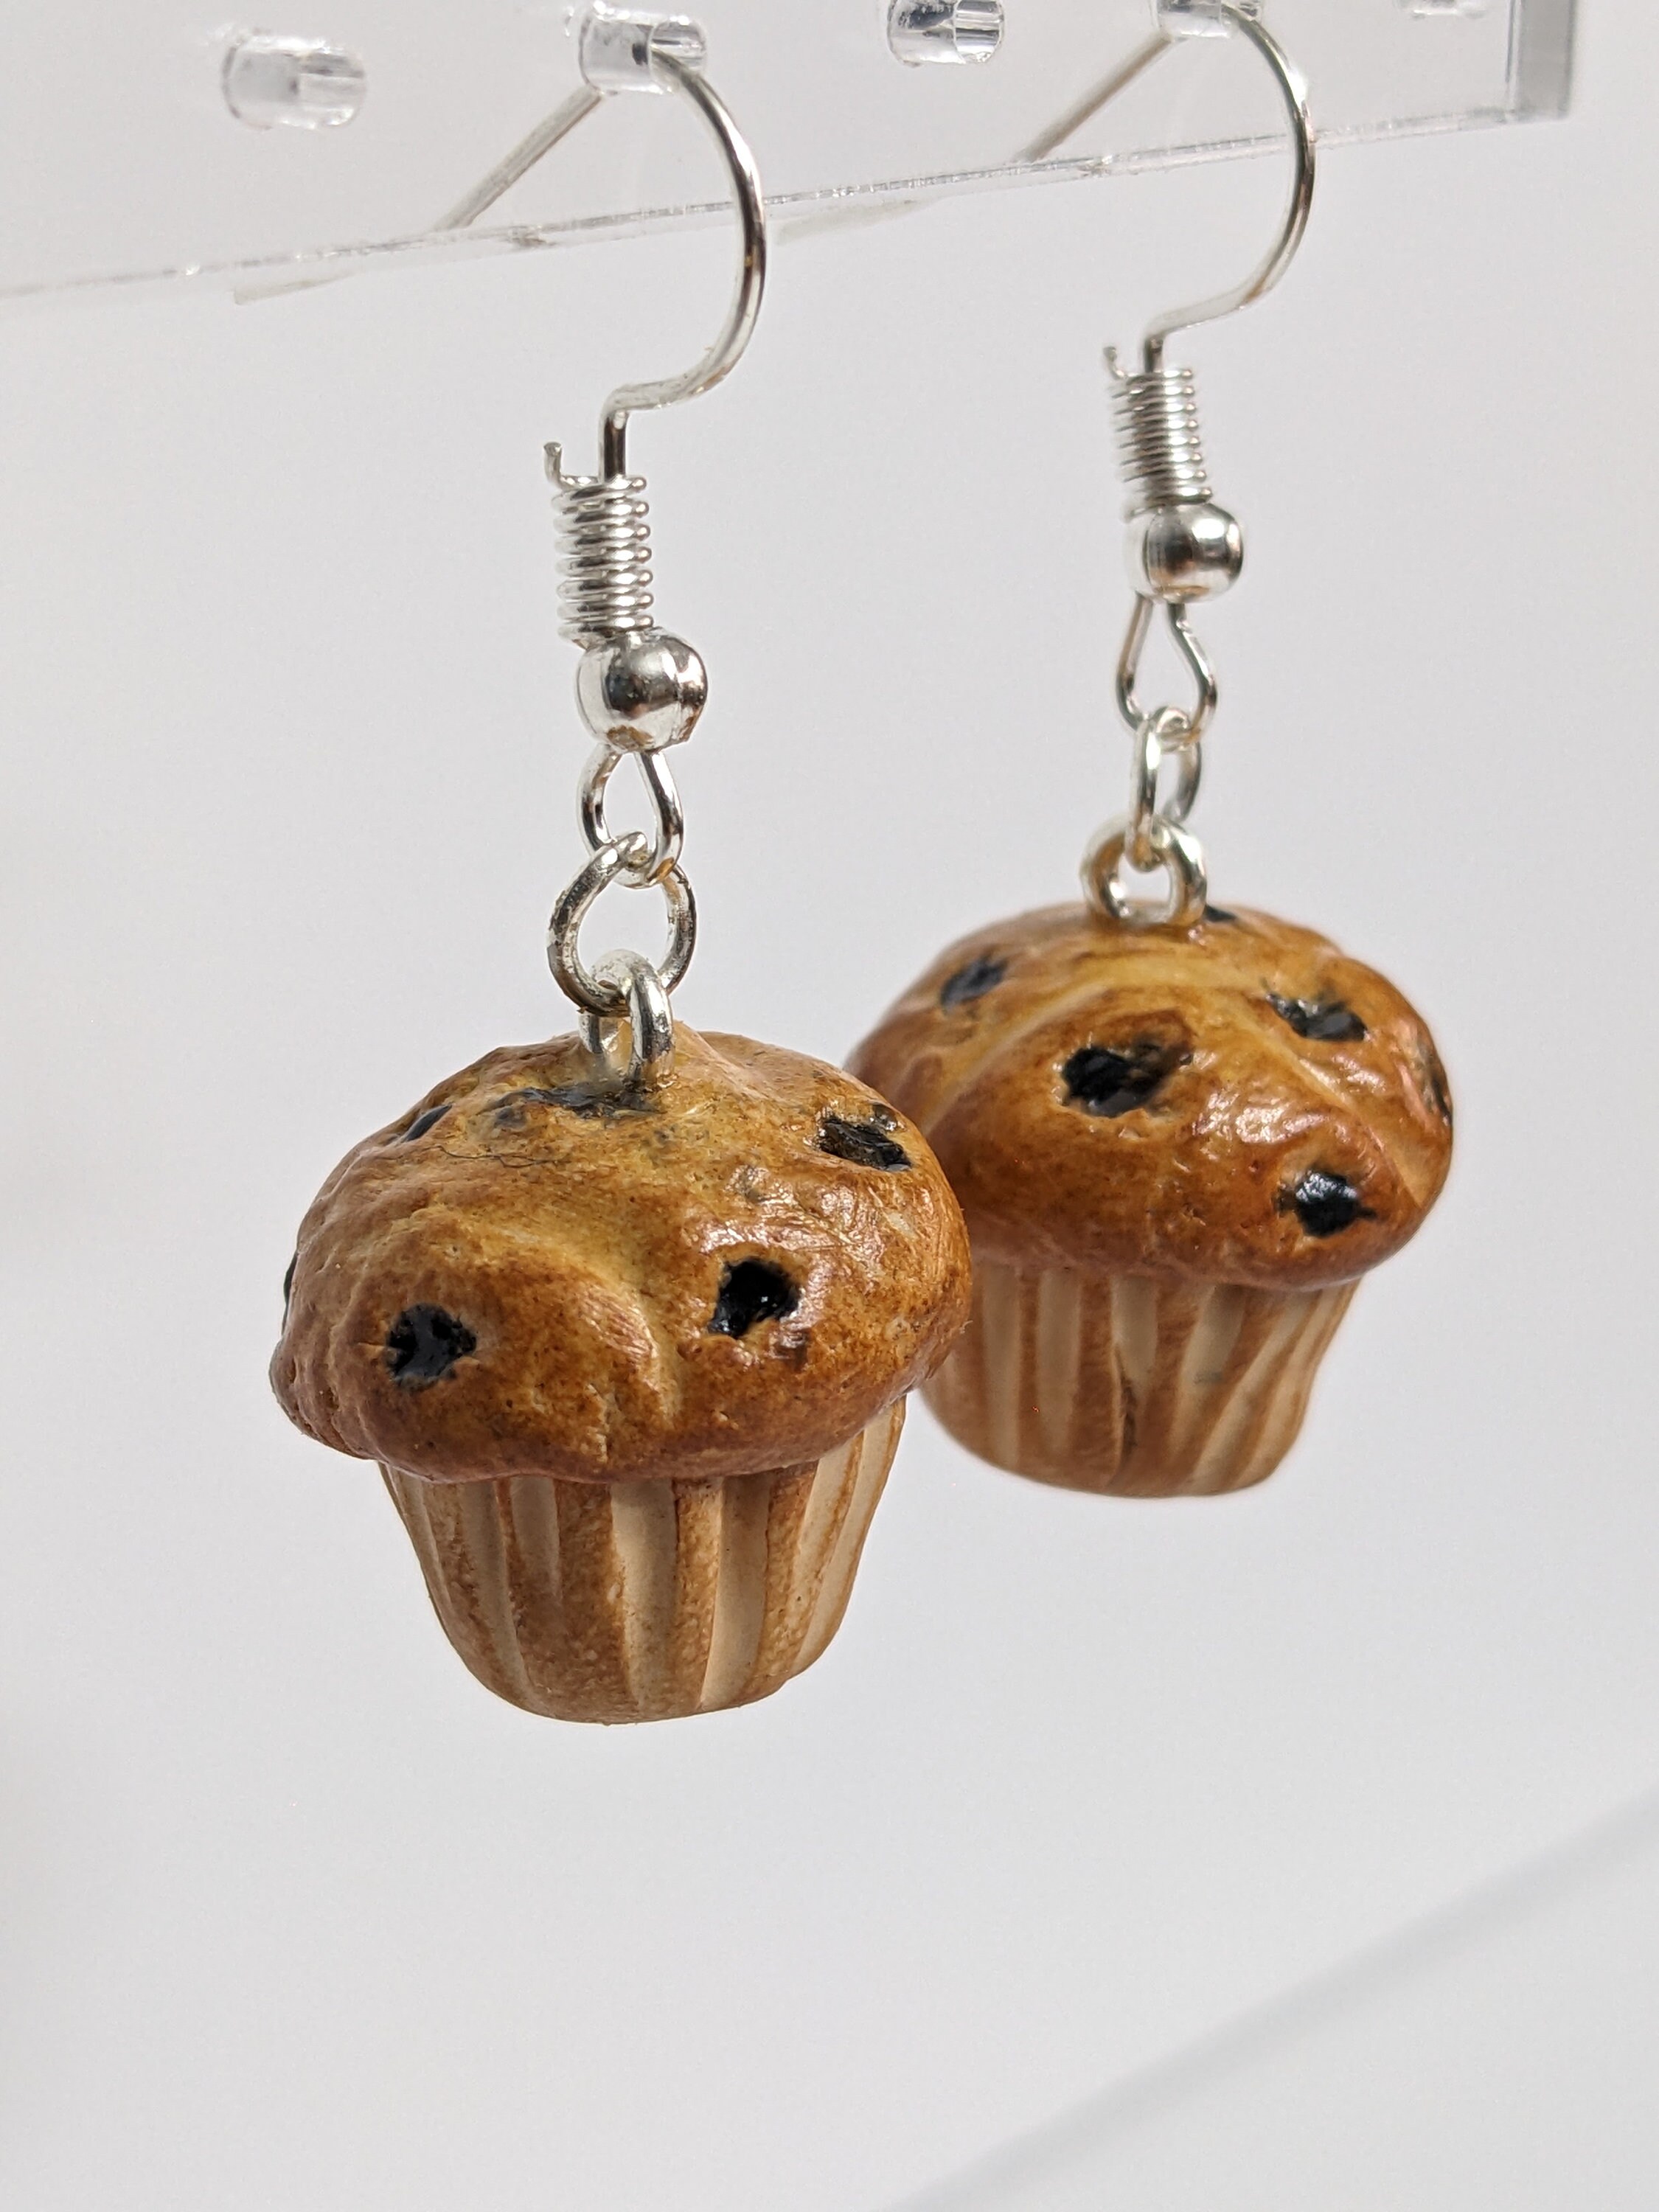 Muffin Earrings L Chocolate Muffin Earrings L Blueberry Muffin Earrings L  Bakery Earrings L Polymer Clay Charms L Food Earrings - Etsy